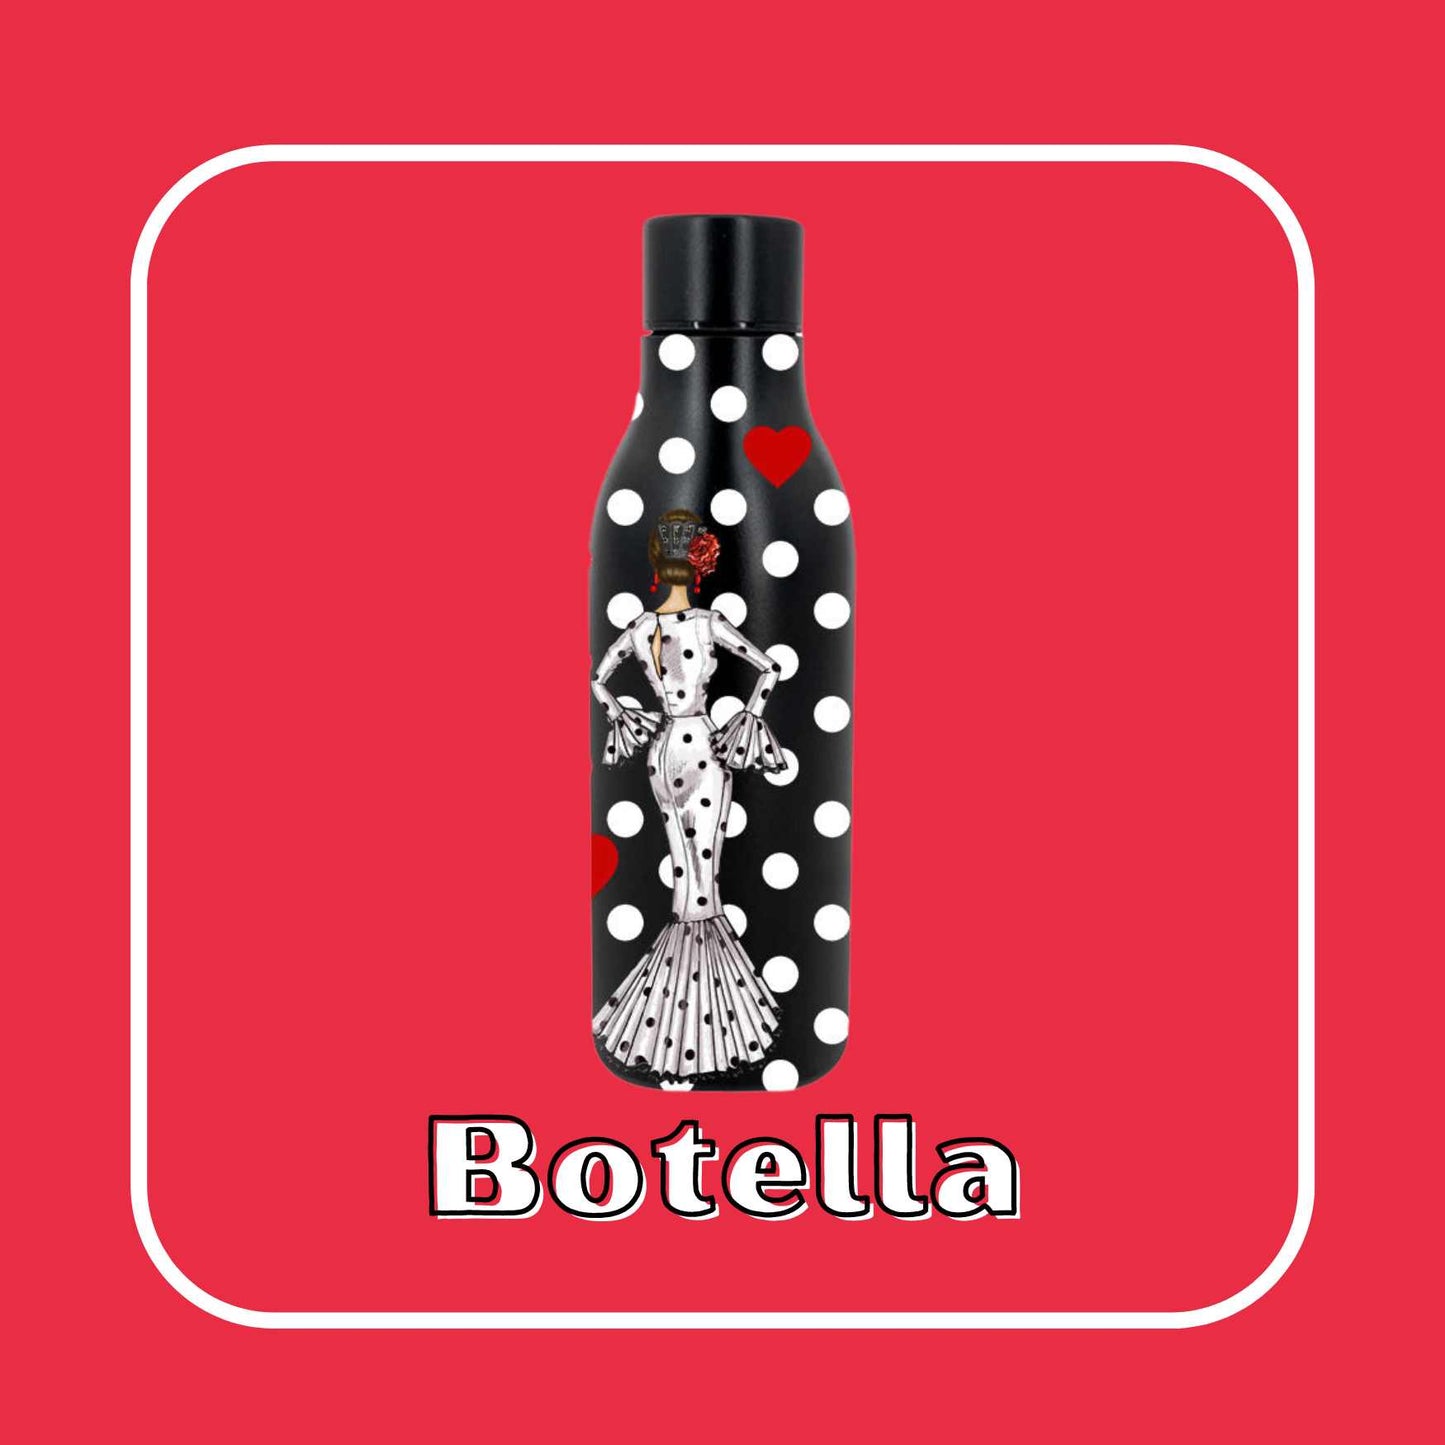 a bottle with a dalmatian design on it